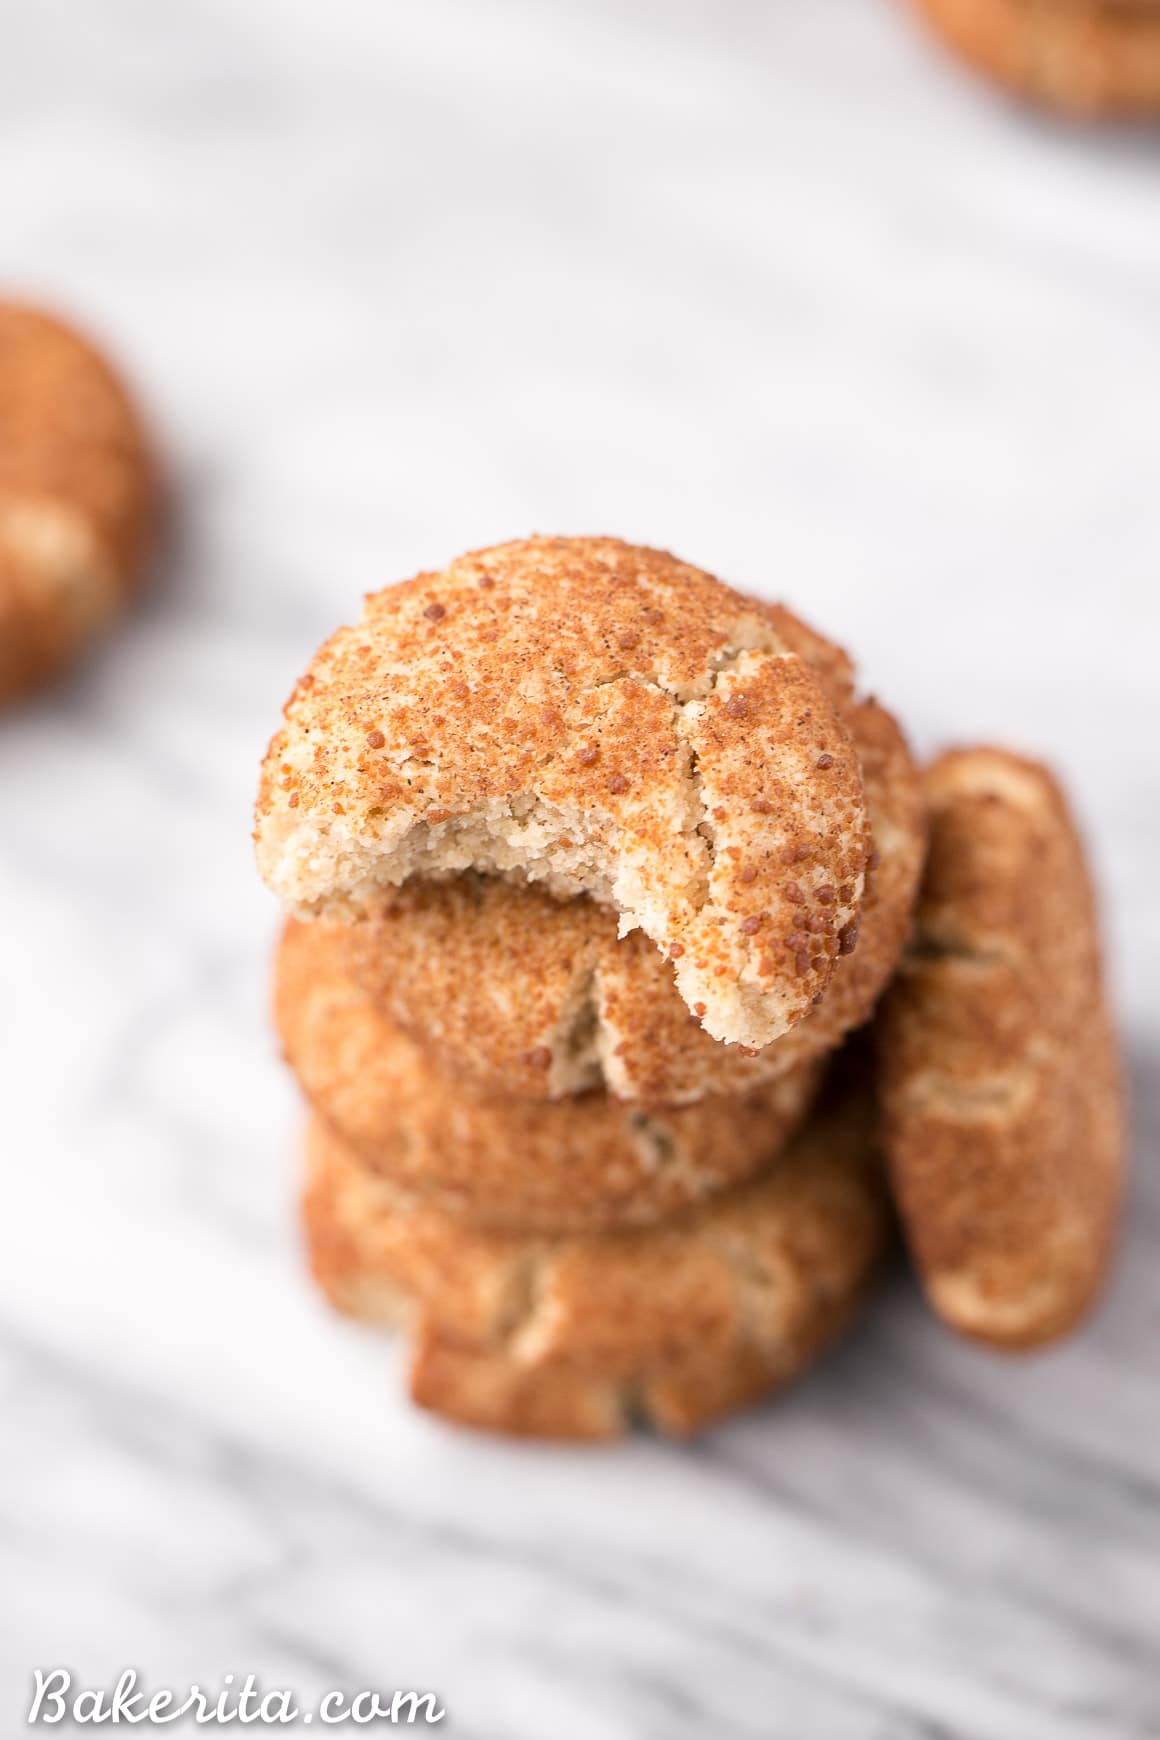 These healthier Snickerdoodles are incredibly soft and flavorful. This gluten-free, Paleo, and vegan recipe comes together so quickly and easily in just twenty minutes, you won't believe it!